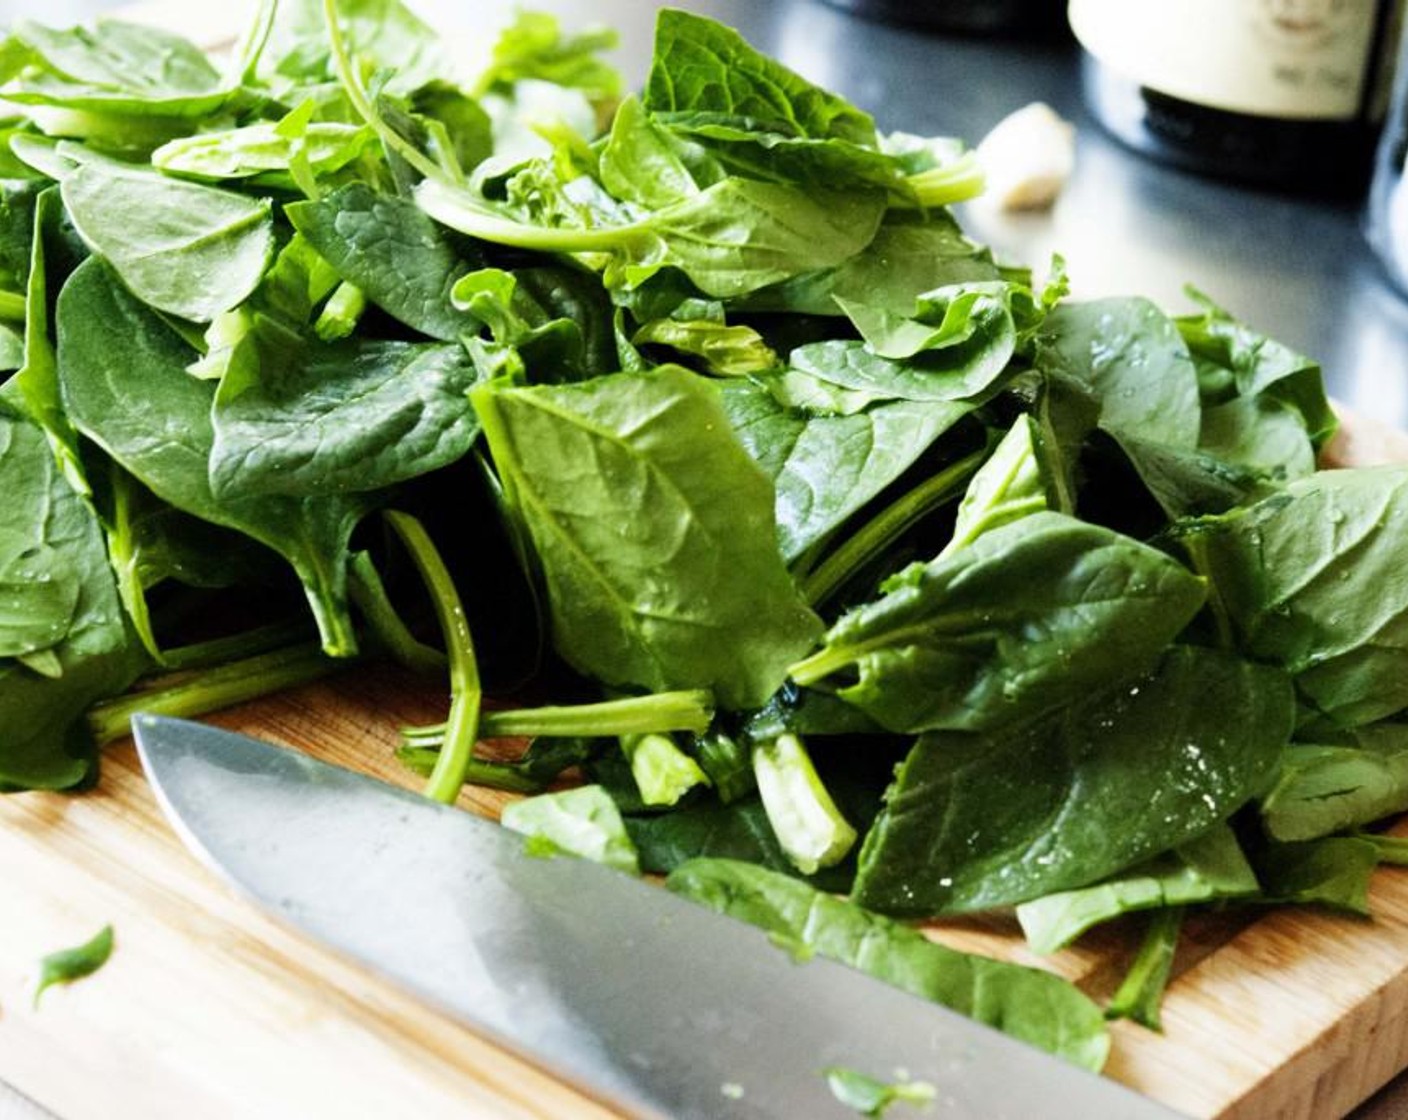 step 5 Take the Fresh Spinach (10.5 oz) and wash them and cut them up.